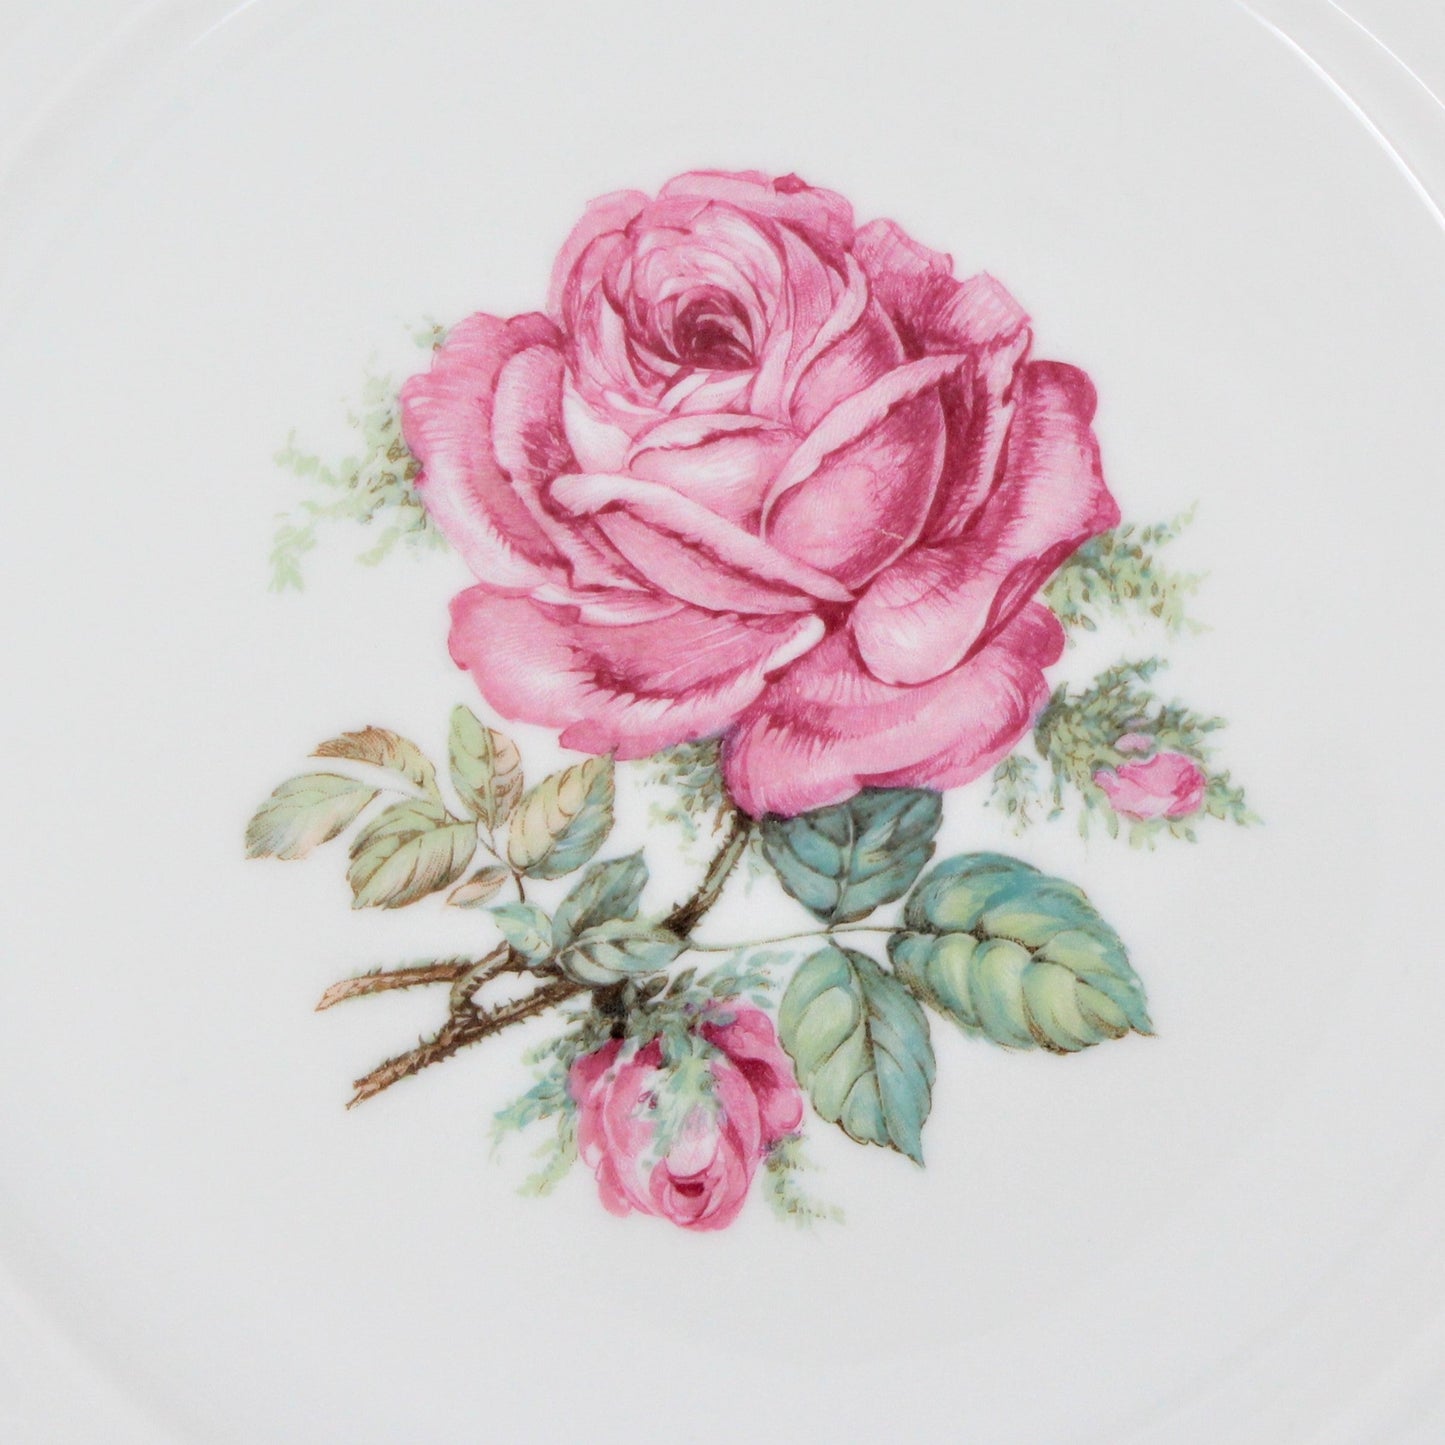 Dinner Plate, Hutschenreuther, The Dundee, Pink Rose, Bavaria, Germany, Vintage